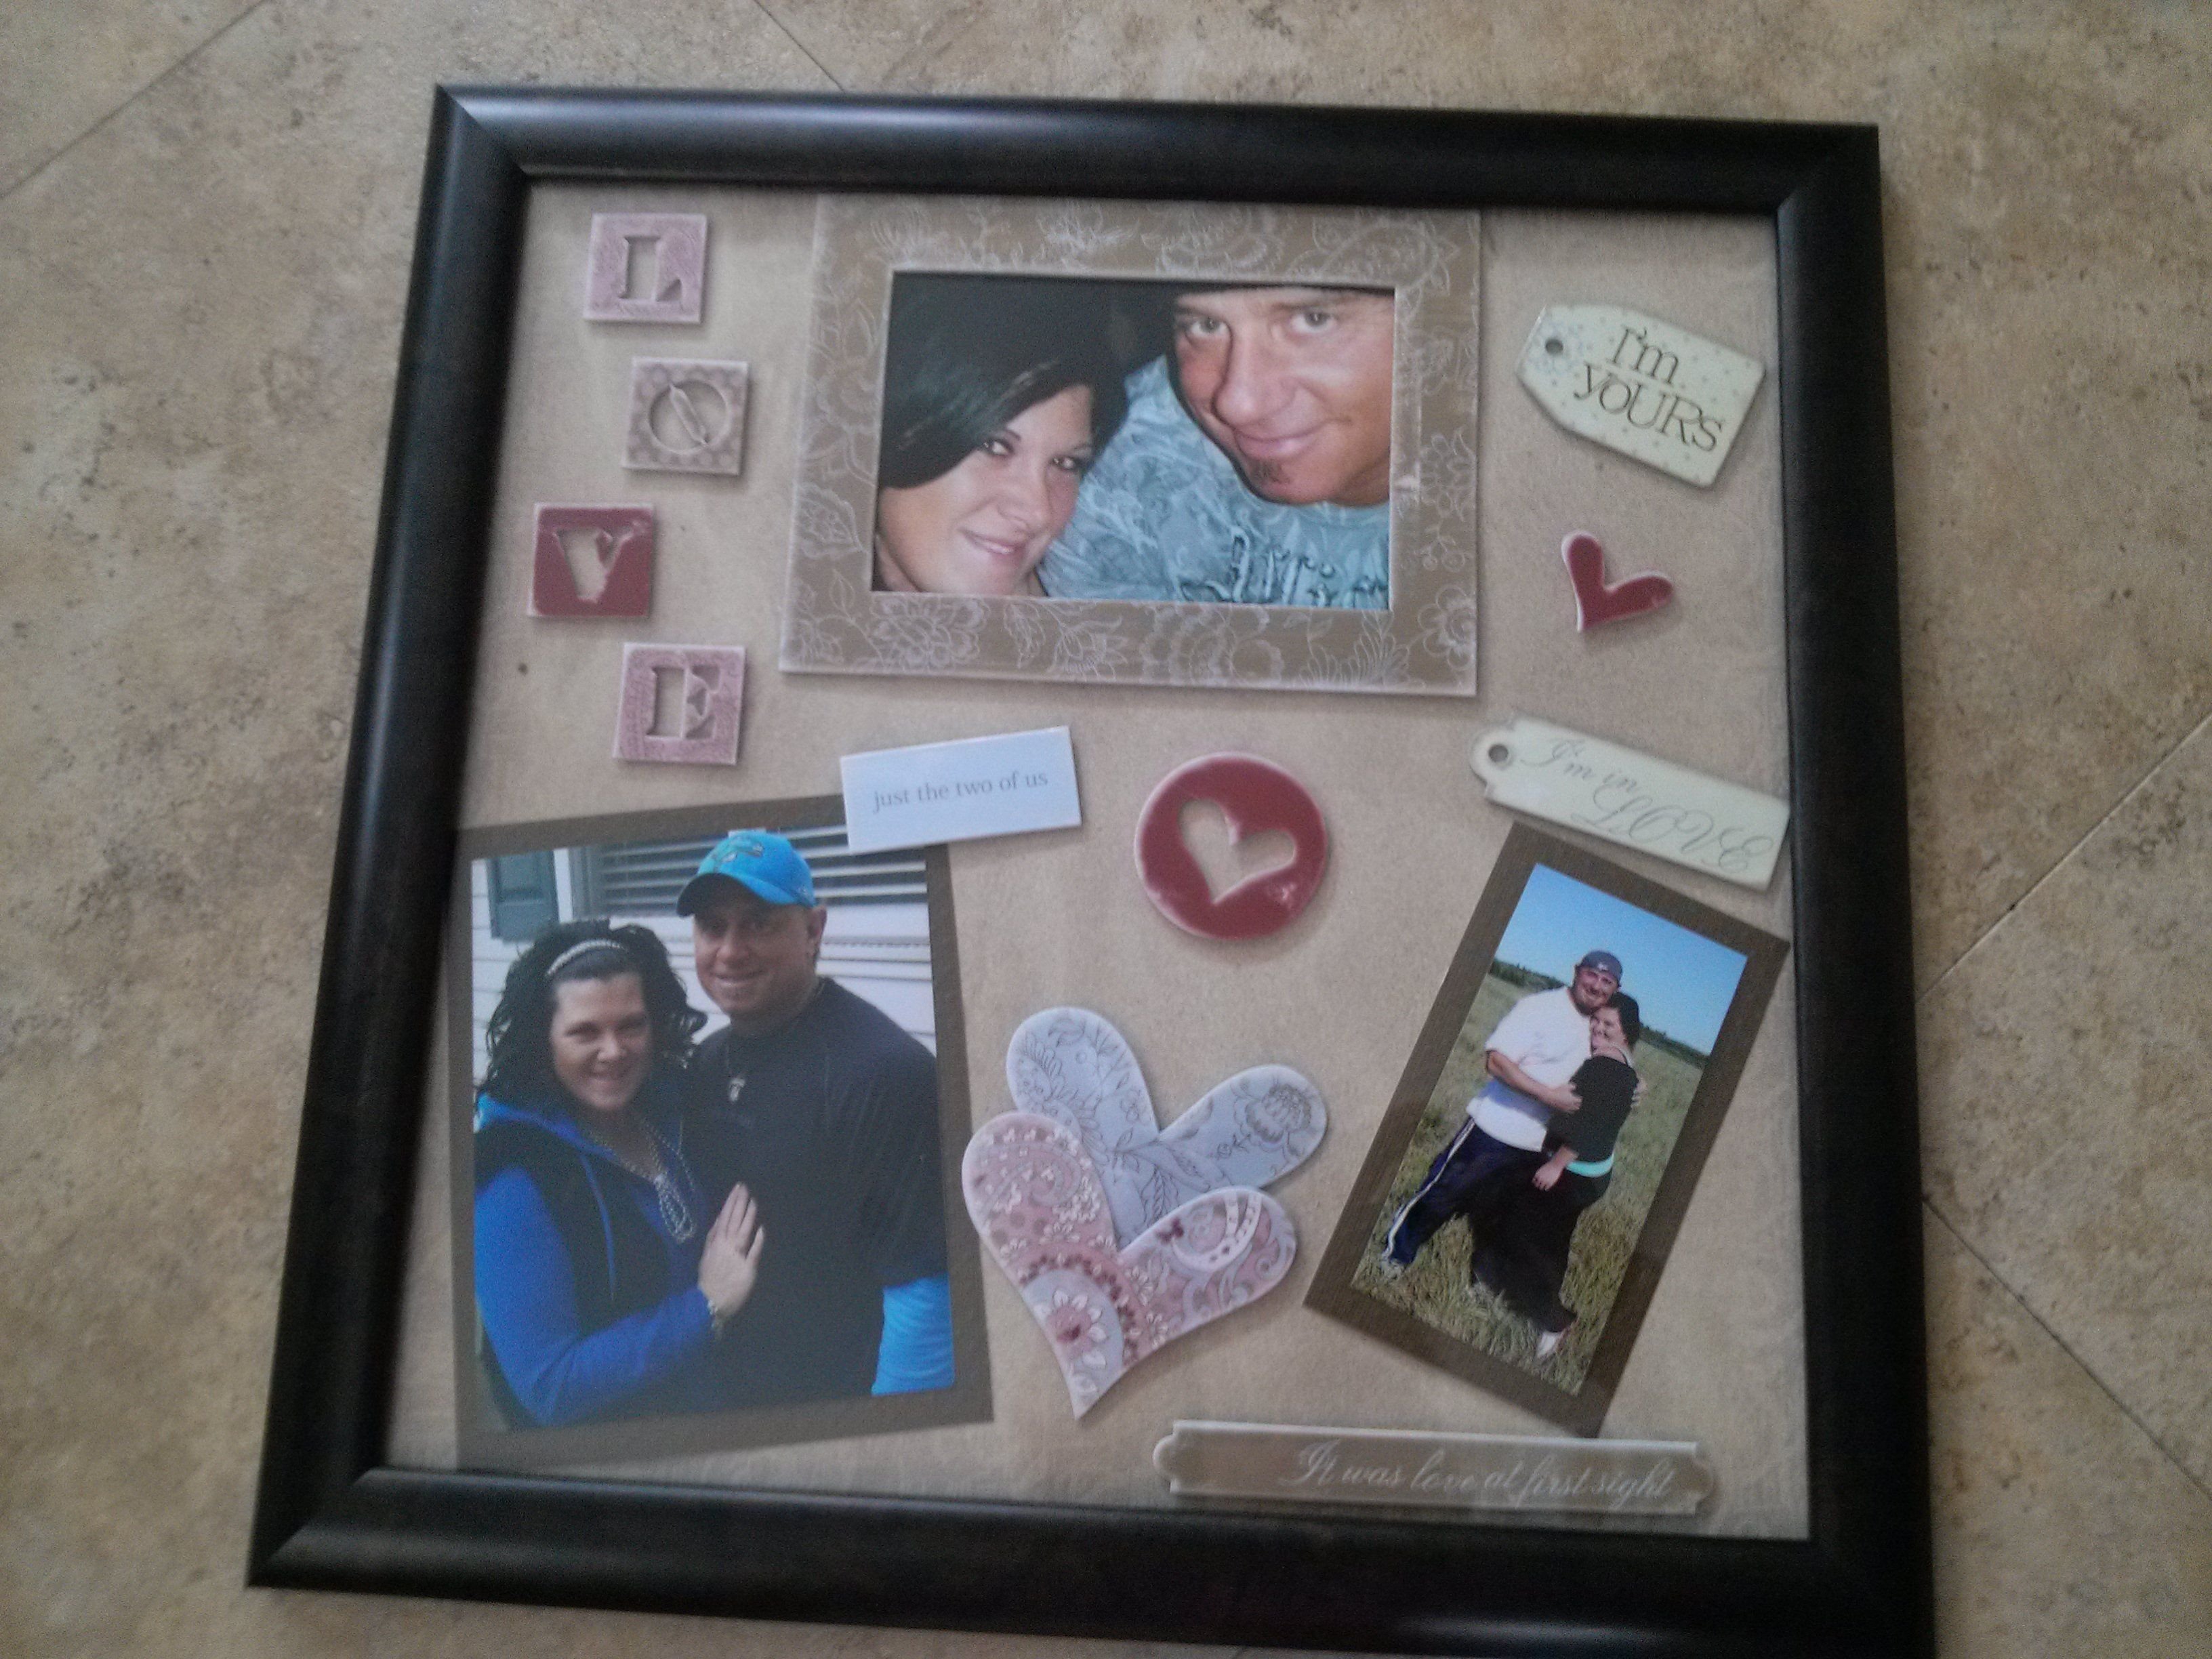 10 Elegant Cool Gift Ideas For Girlfriend make a scrapbook page and frame it makes a nice inexpensive gift 2022